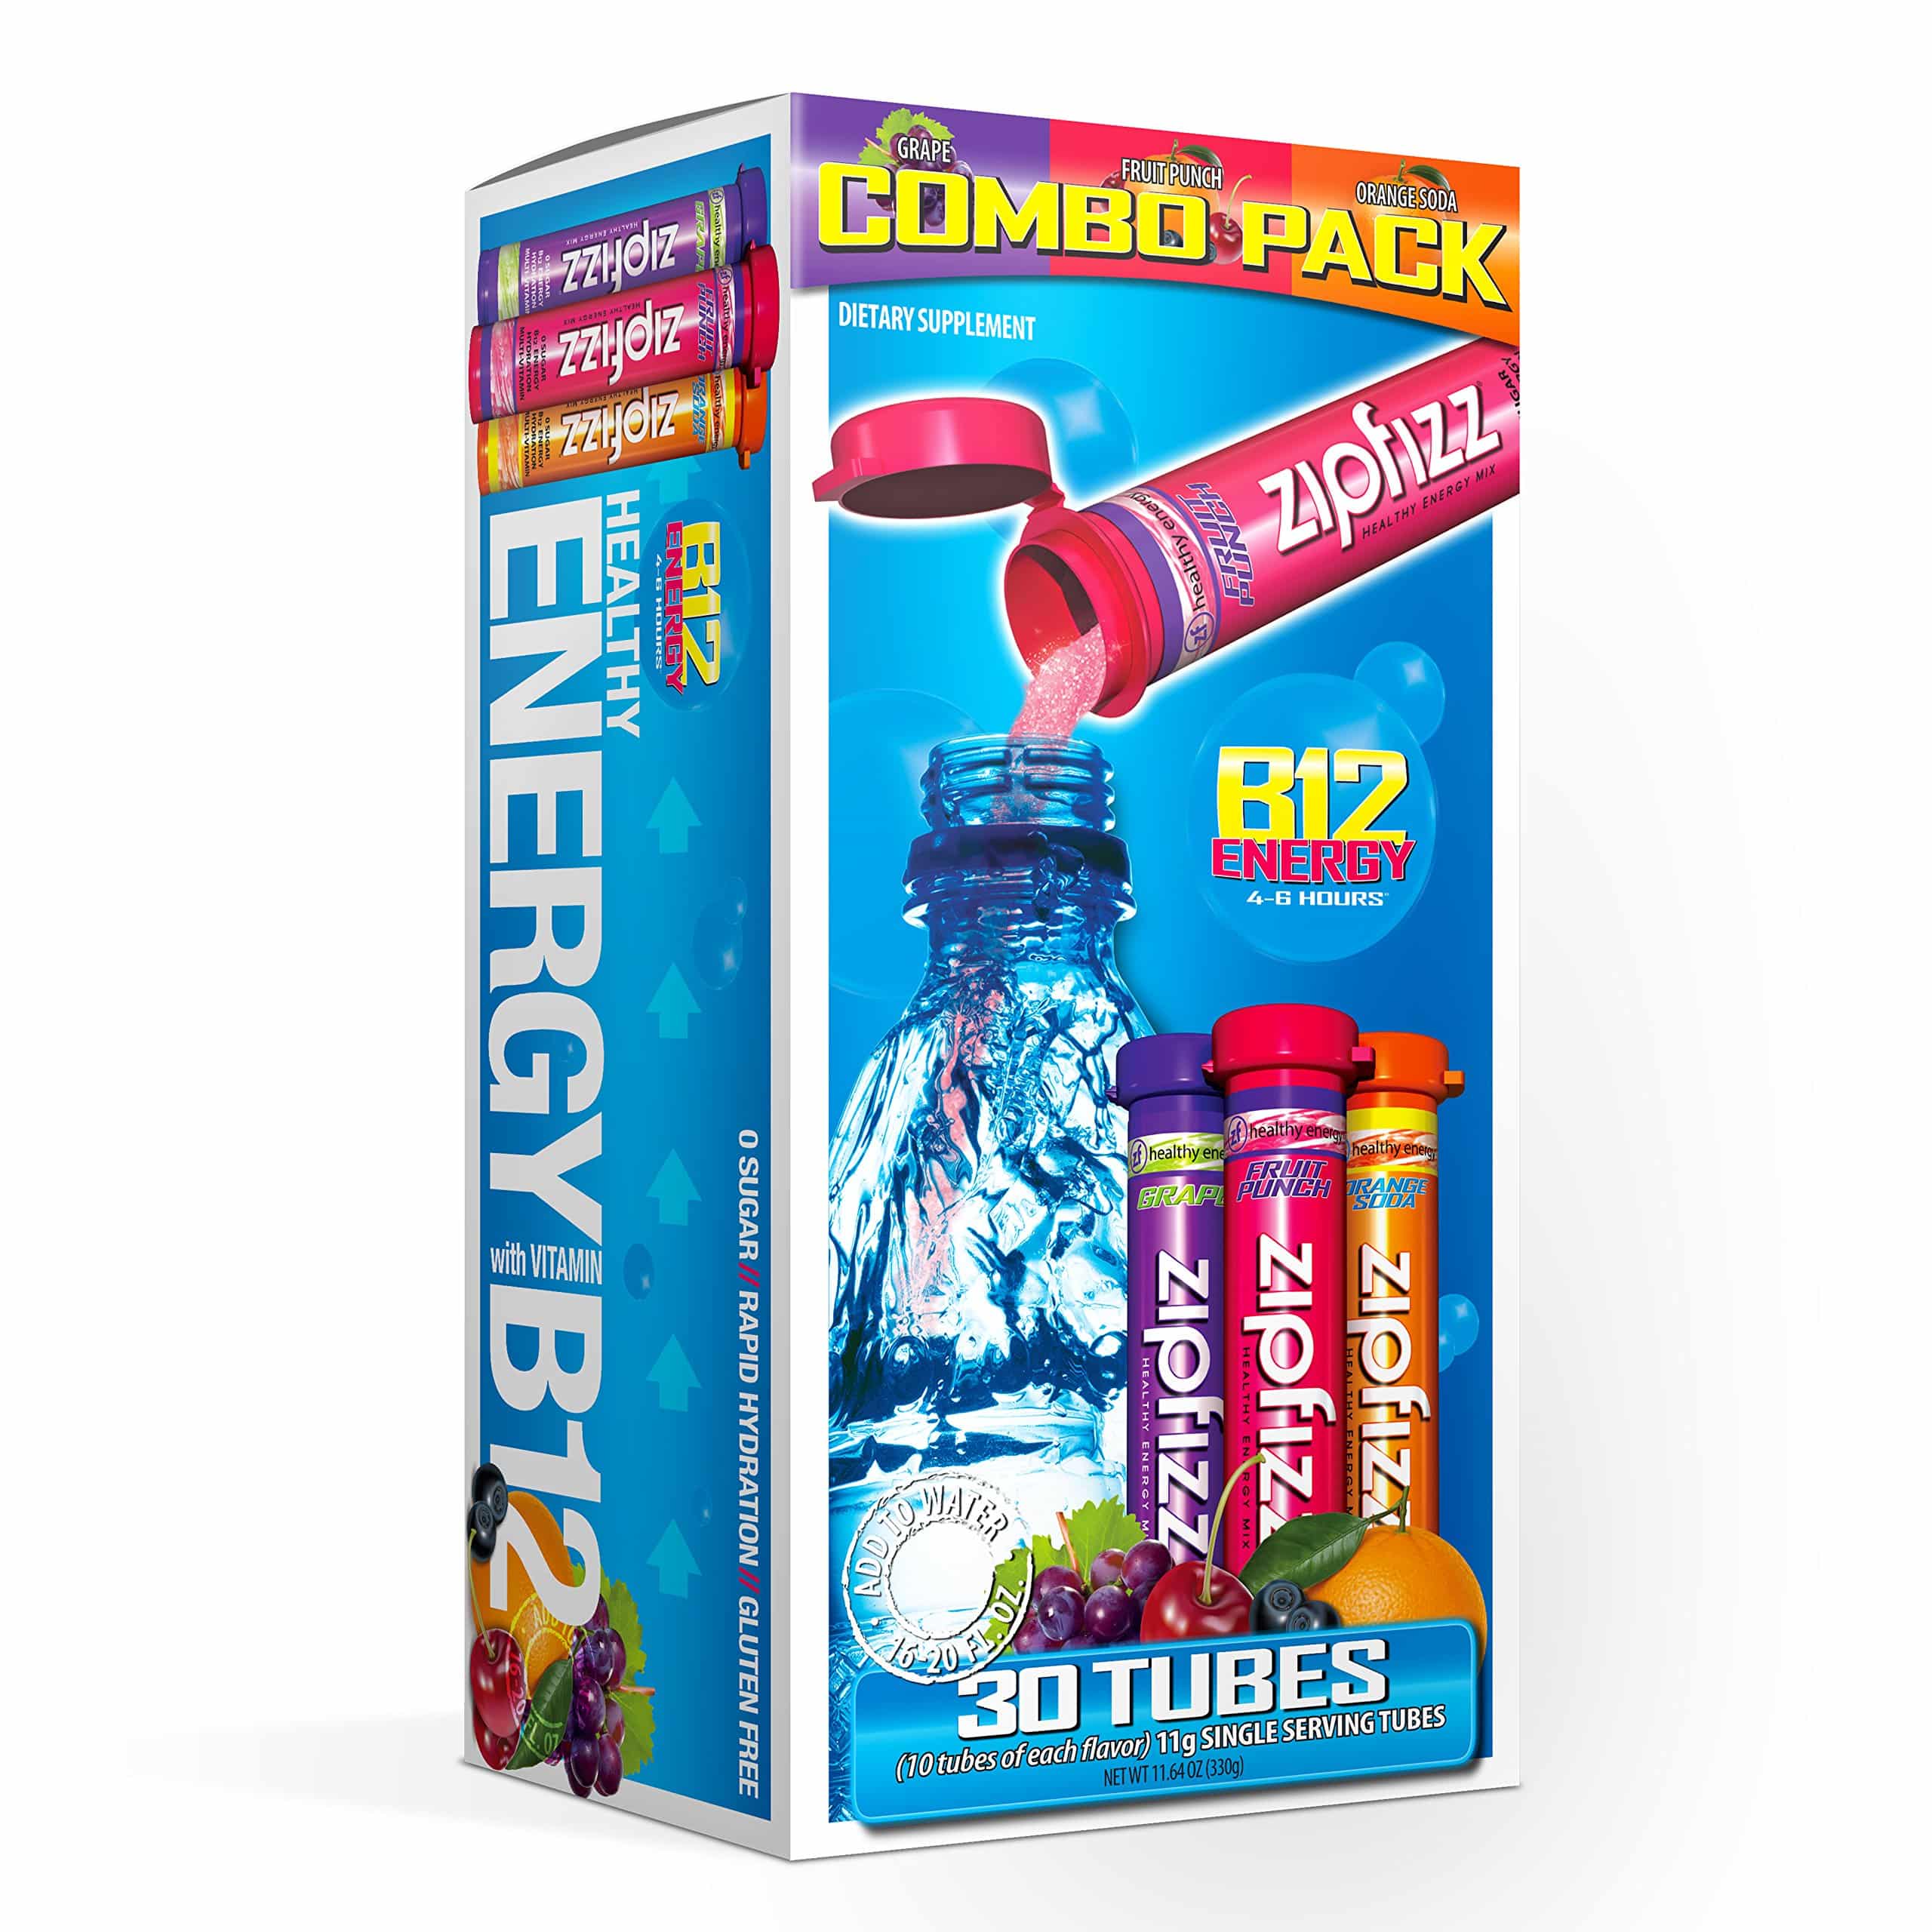 Zipfizz Energy Drink Mix Variety Flavor Pack 30 Count Tubes Low Carb No ...